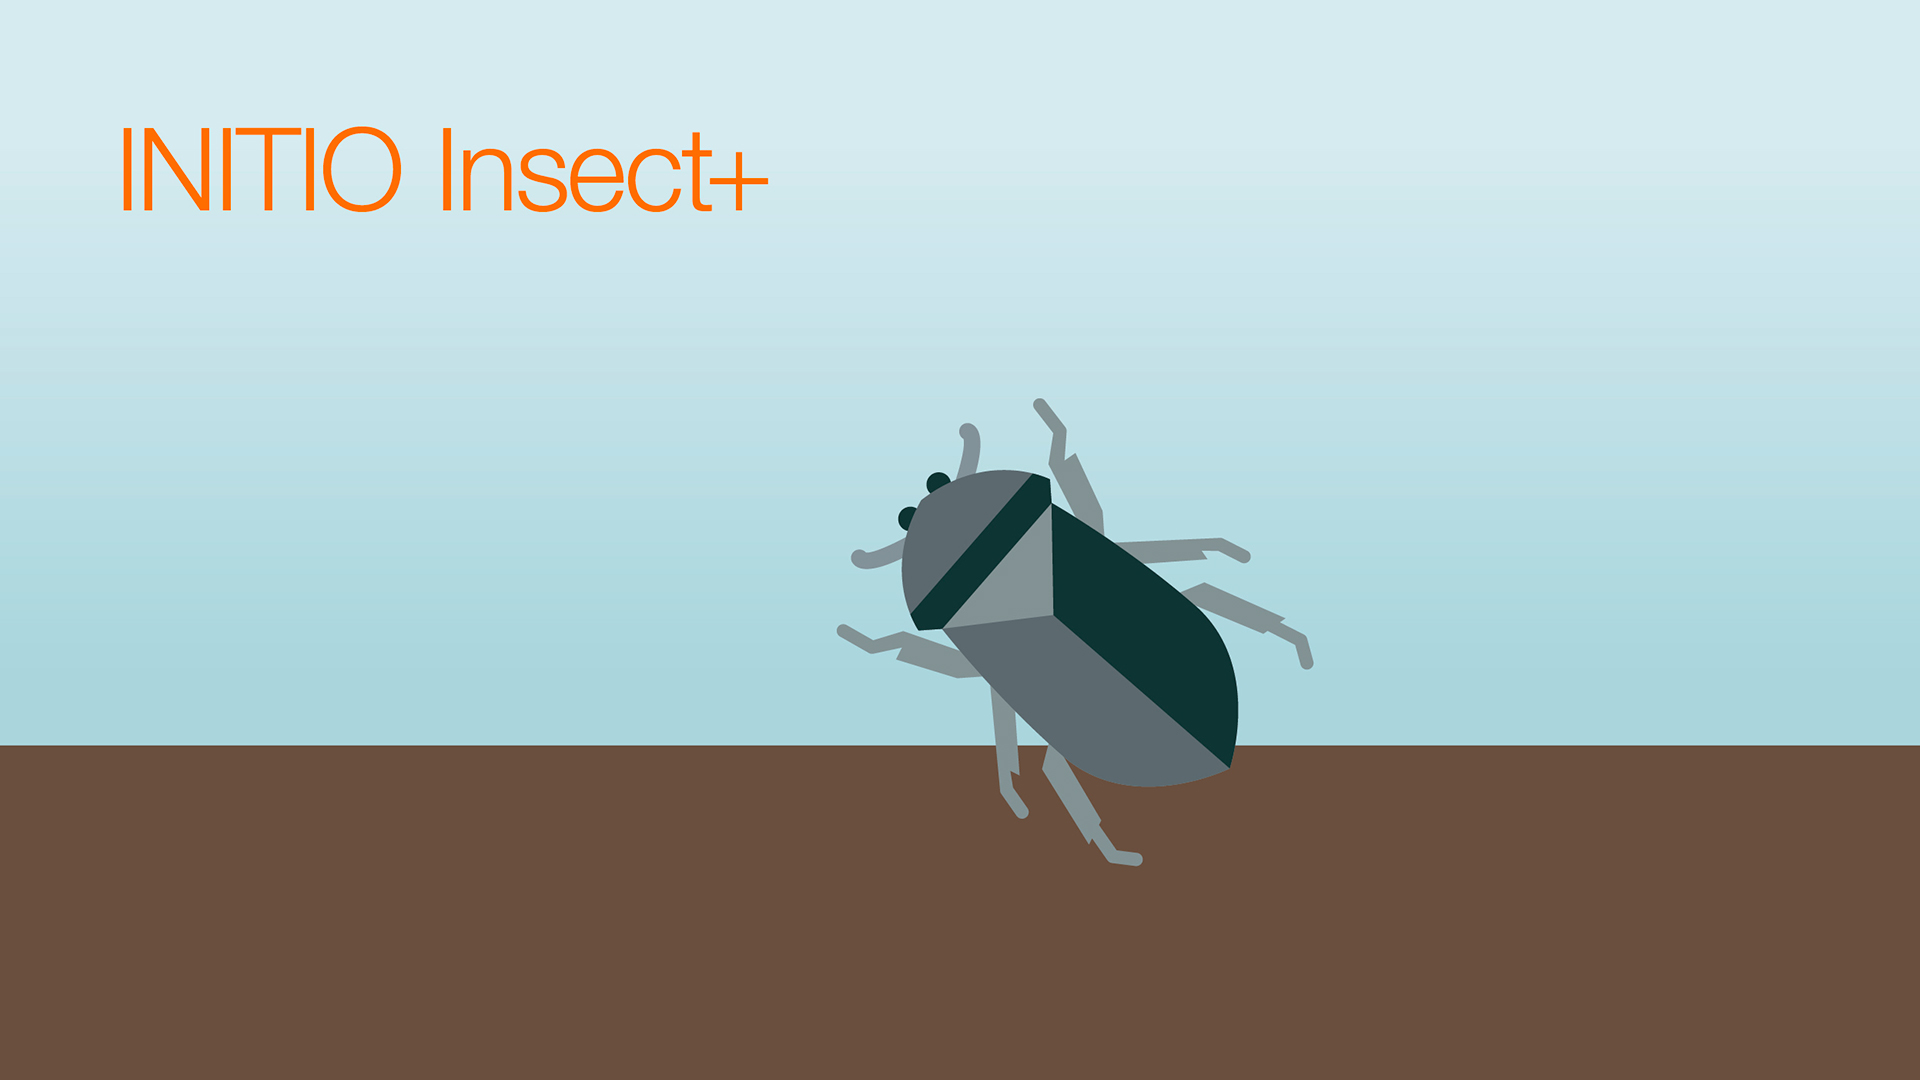 KWS-DLG-2022-05-17-icons-initio-insect.jpg